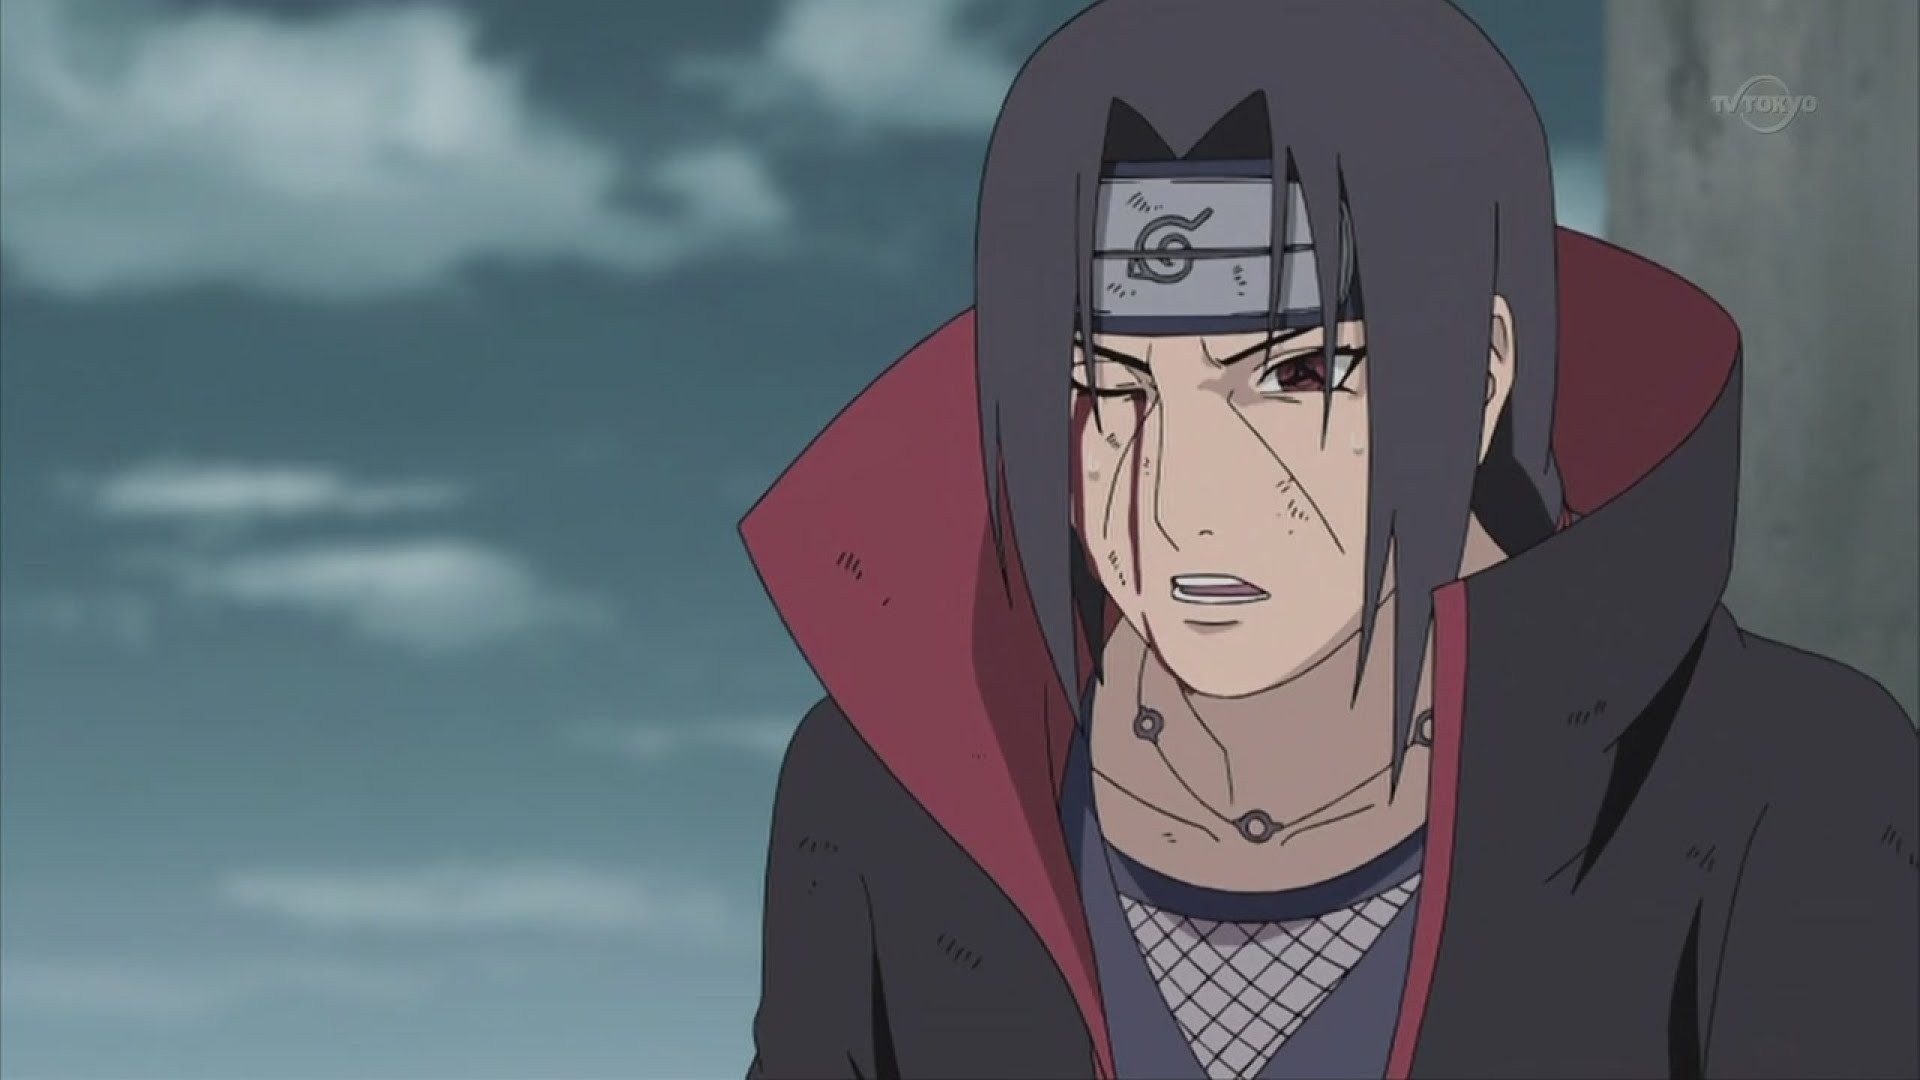 Itachi Uchiha Wallpaper Download Free Awesome Backgrounds For Desktop Computers And